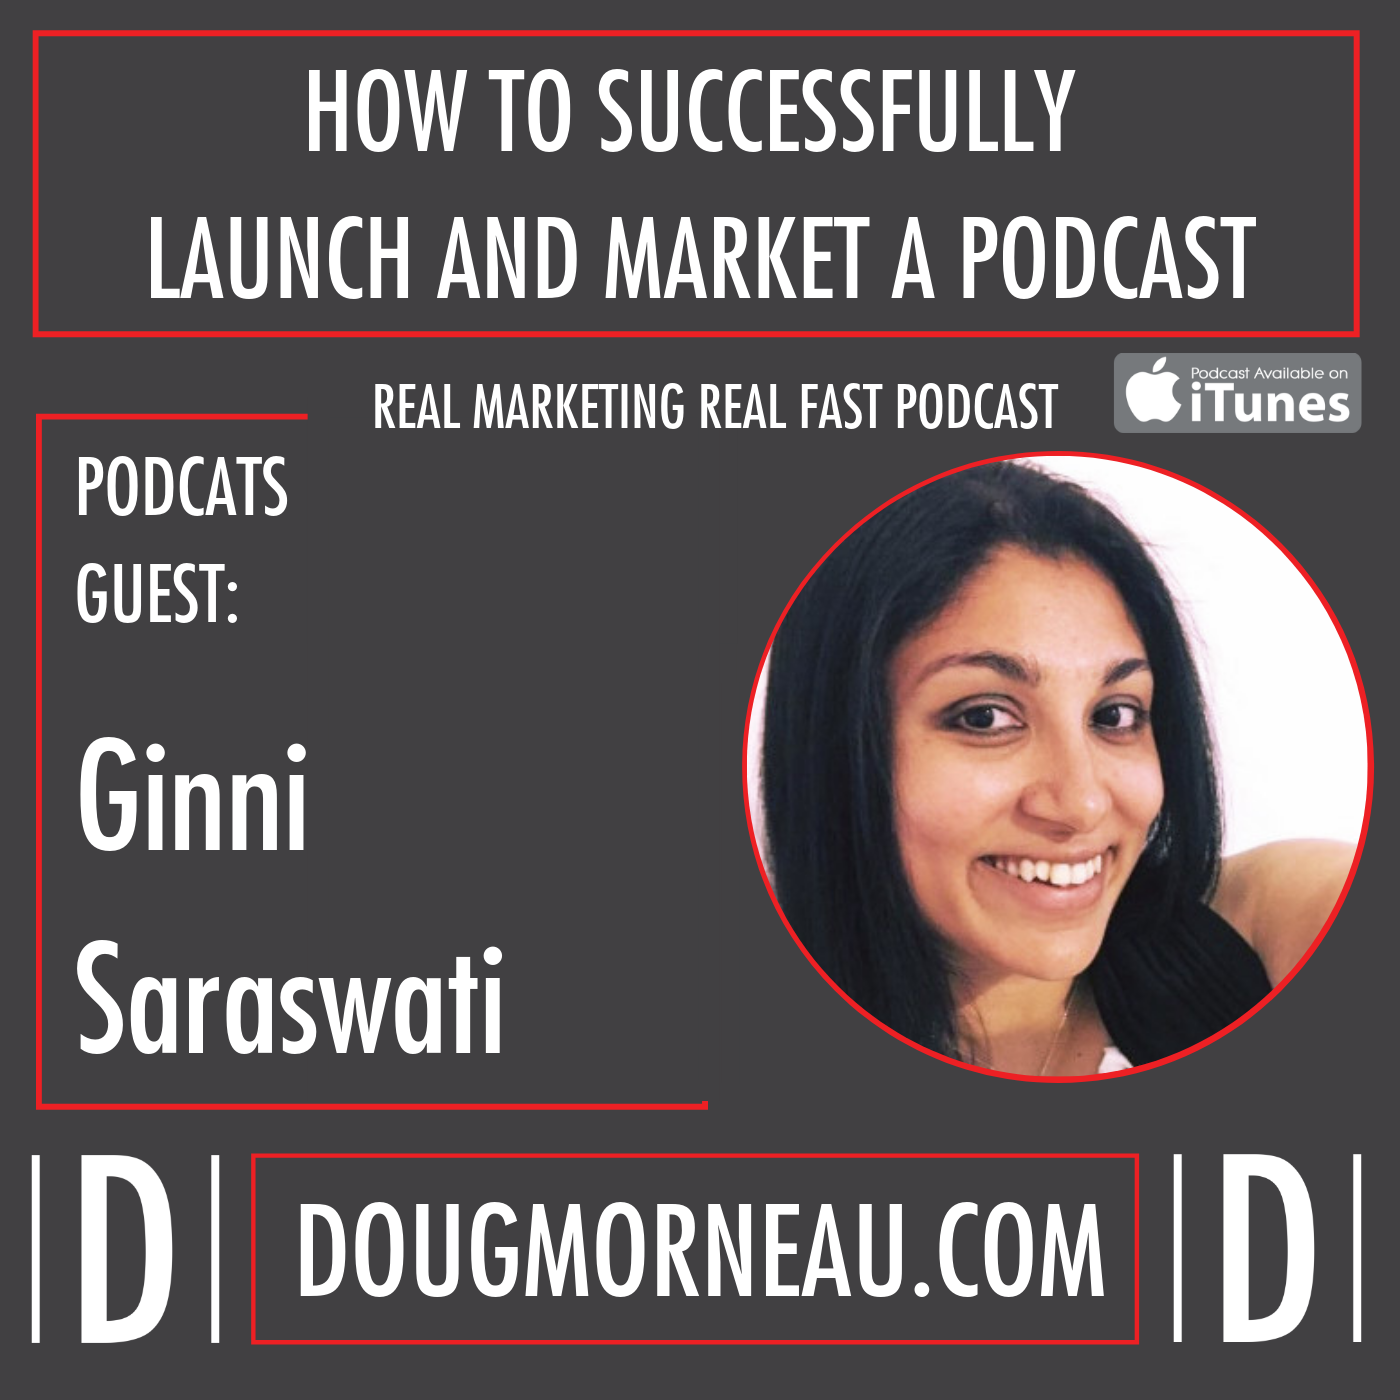 HOW TO SUCCESSFULLY LAUNCH AND MARKET A PODCAST - GINNI SARASWATI - DOUG MORNEAU - REAL MARKETING REAL FAST PODCAST